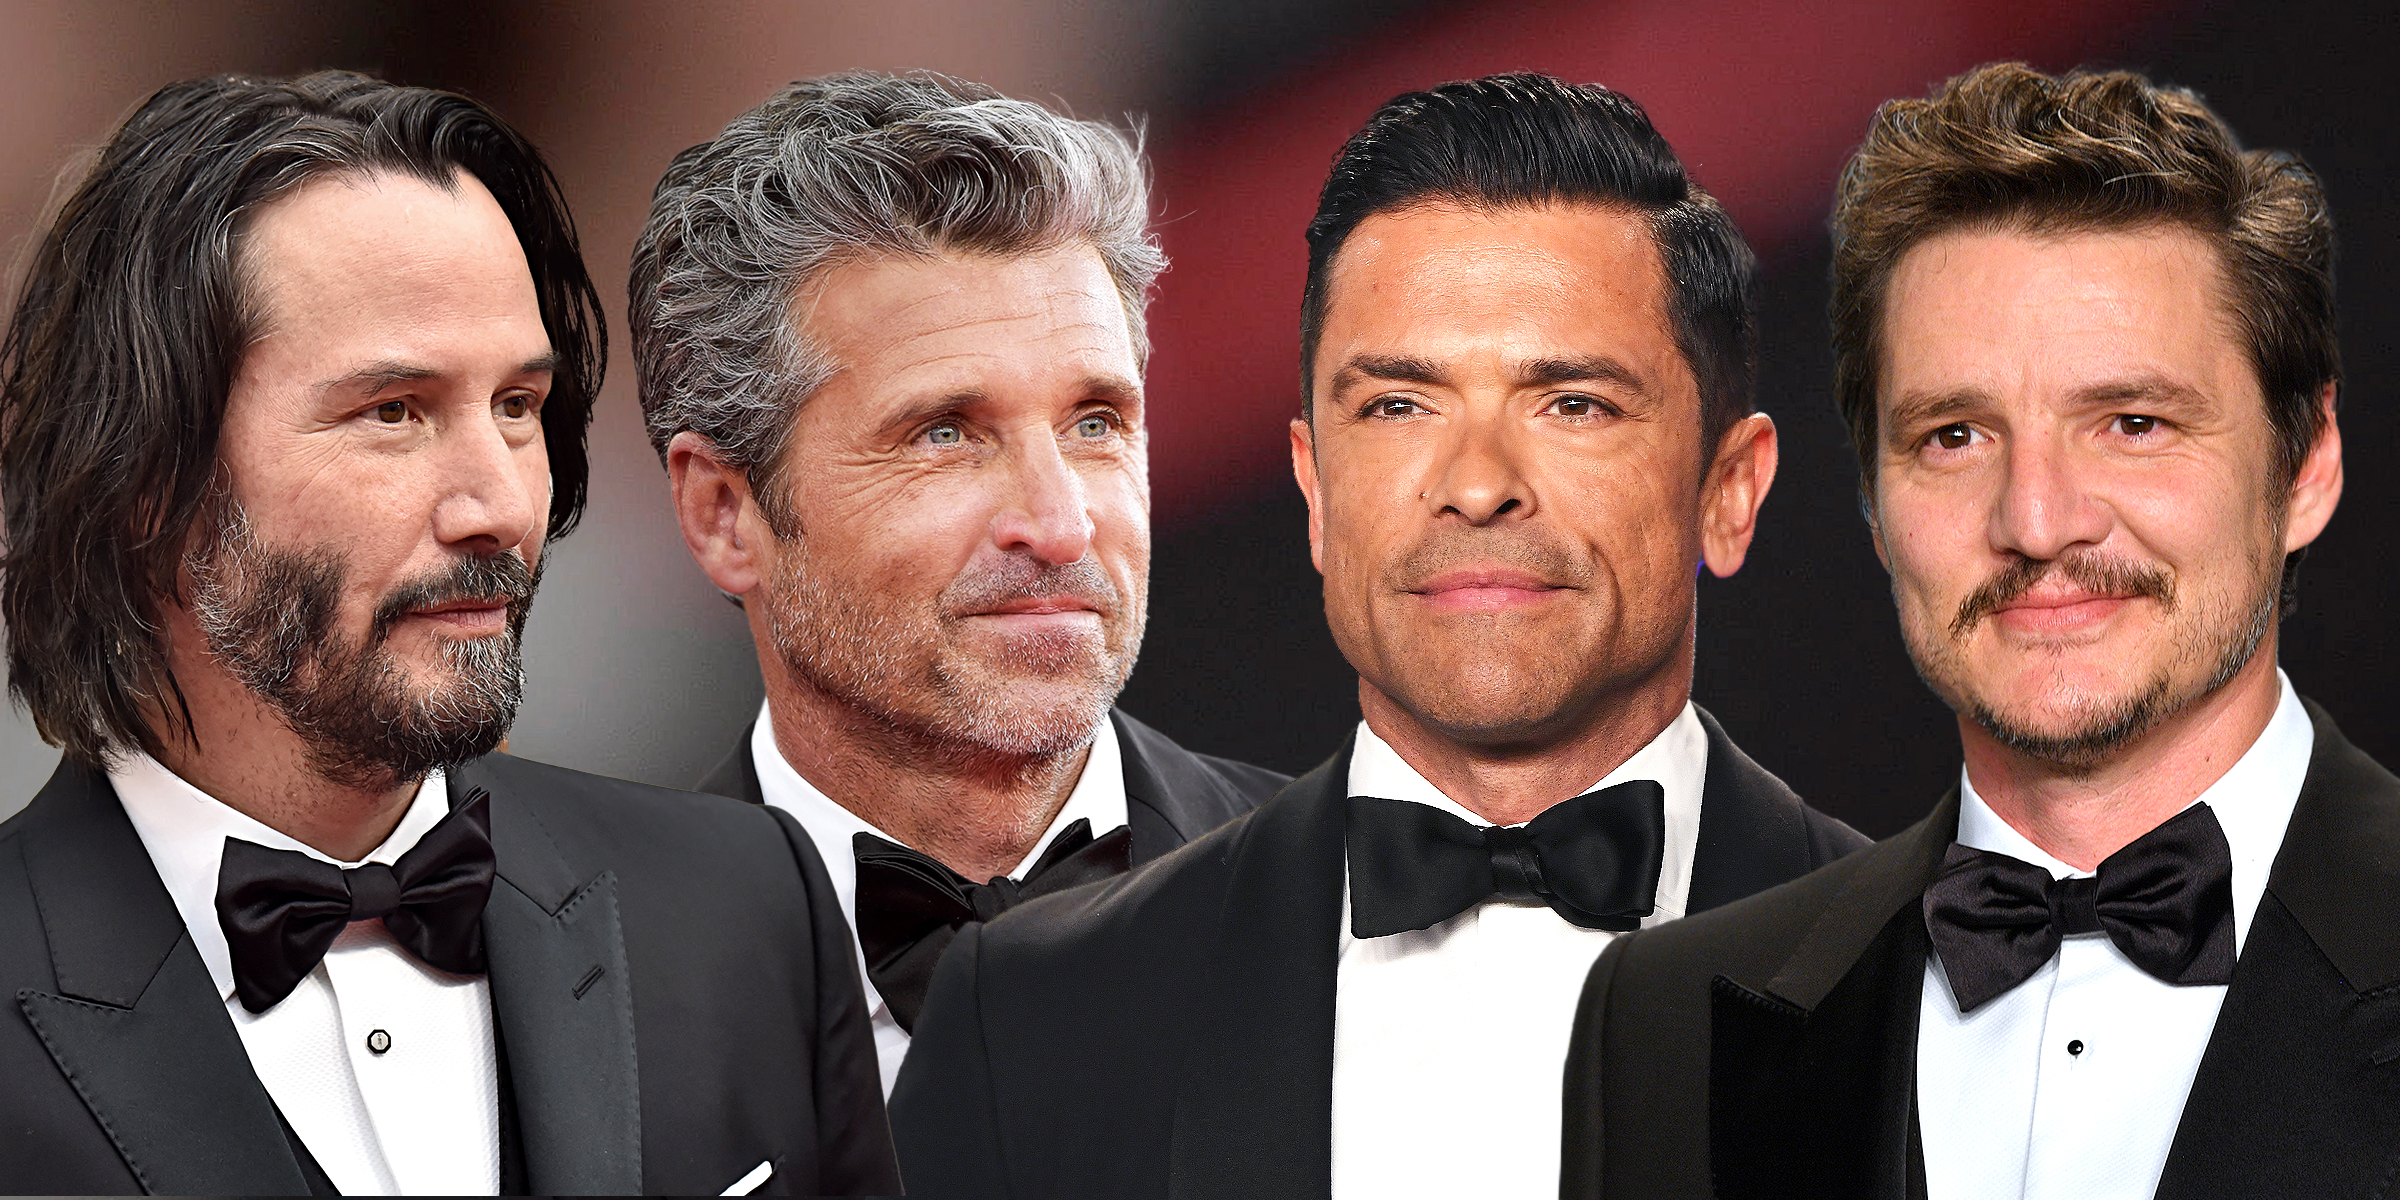 Keanu Reeves, Patrick Dempsey, Mark Consuelos et Pedro Pascal | Source : Getty Images